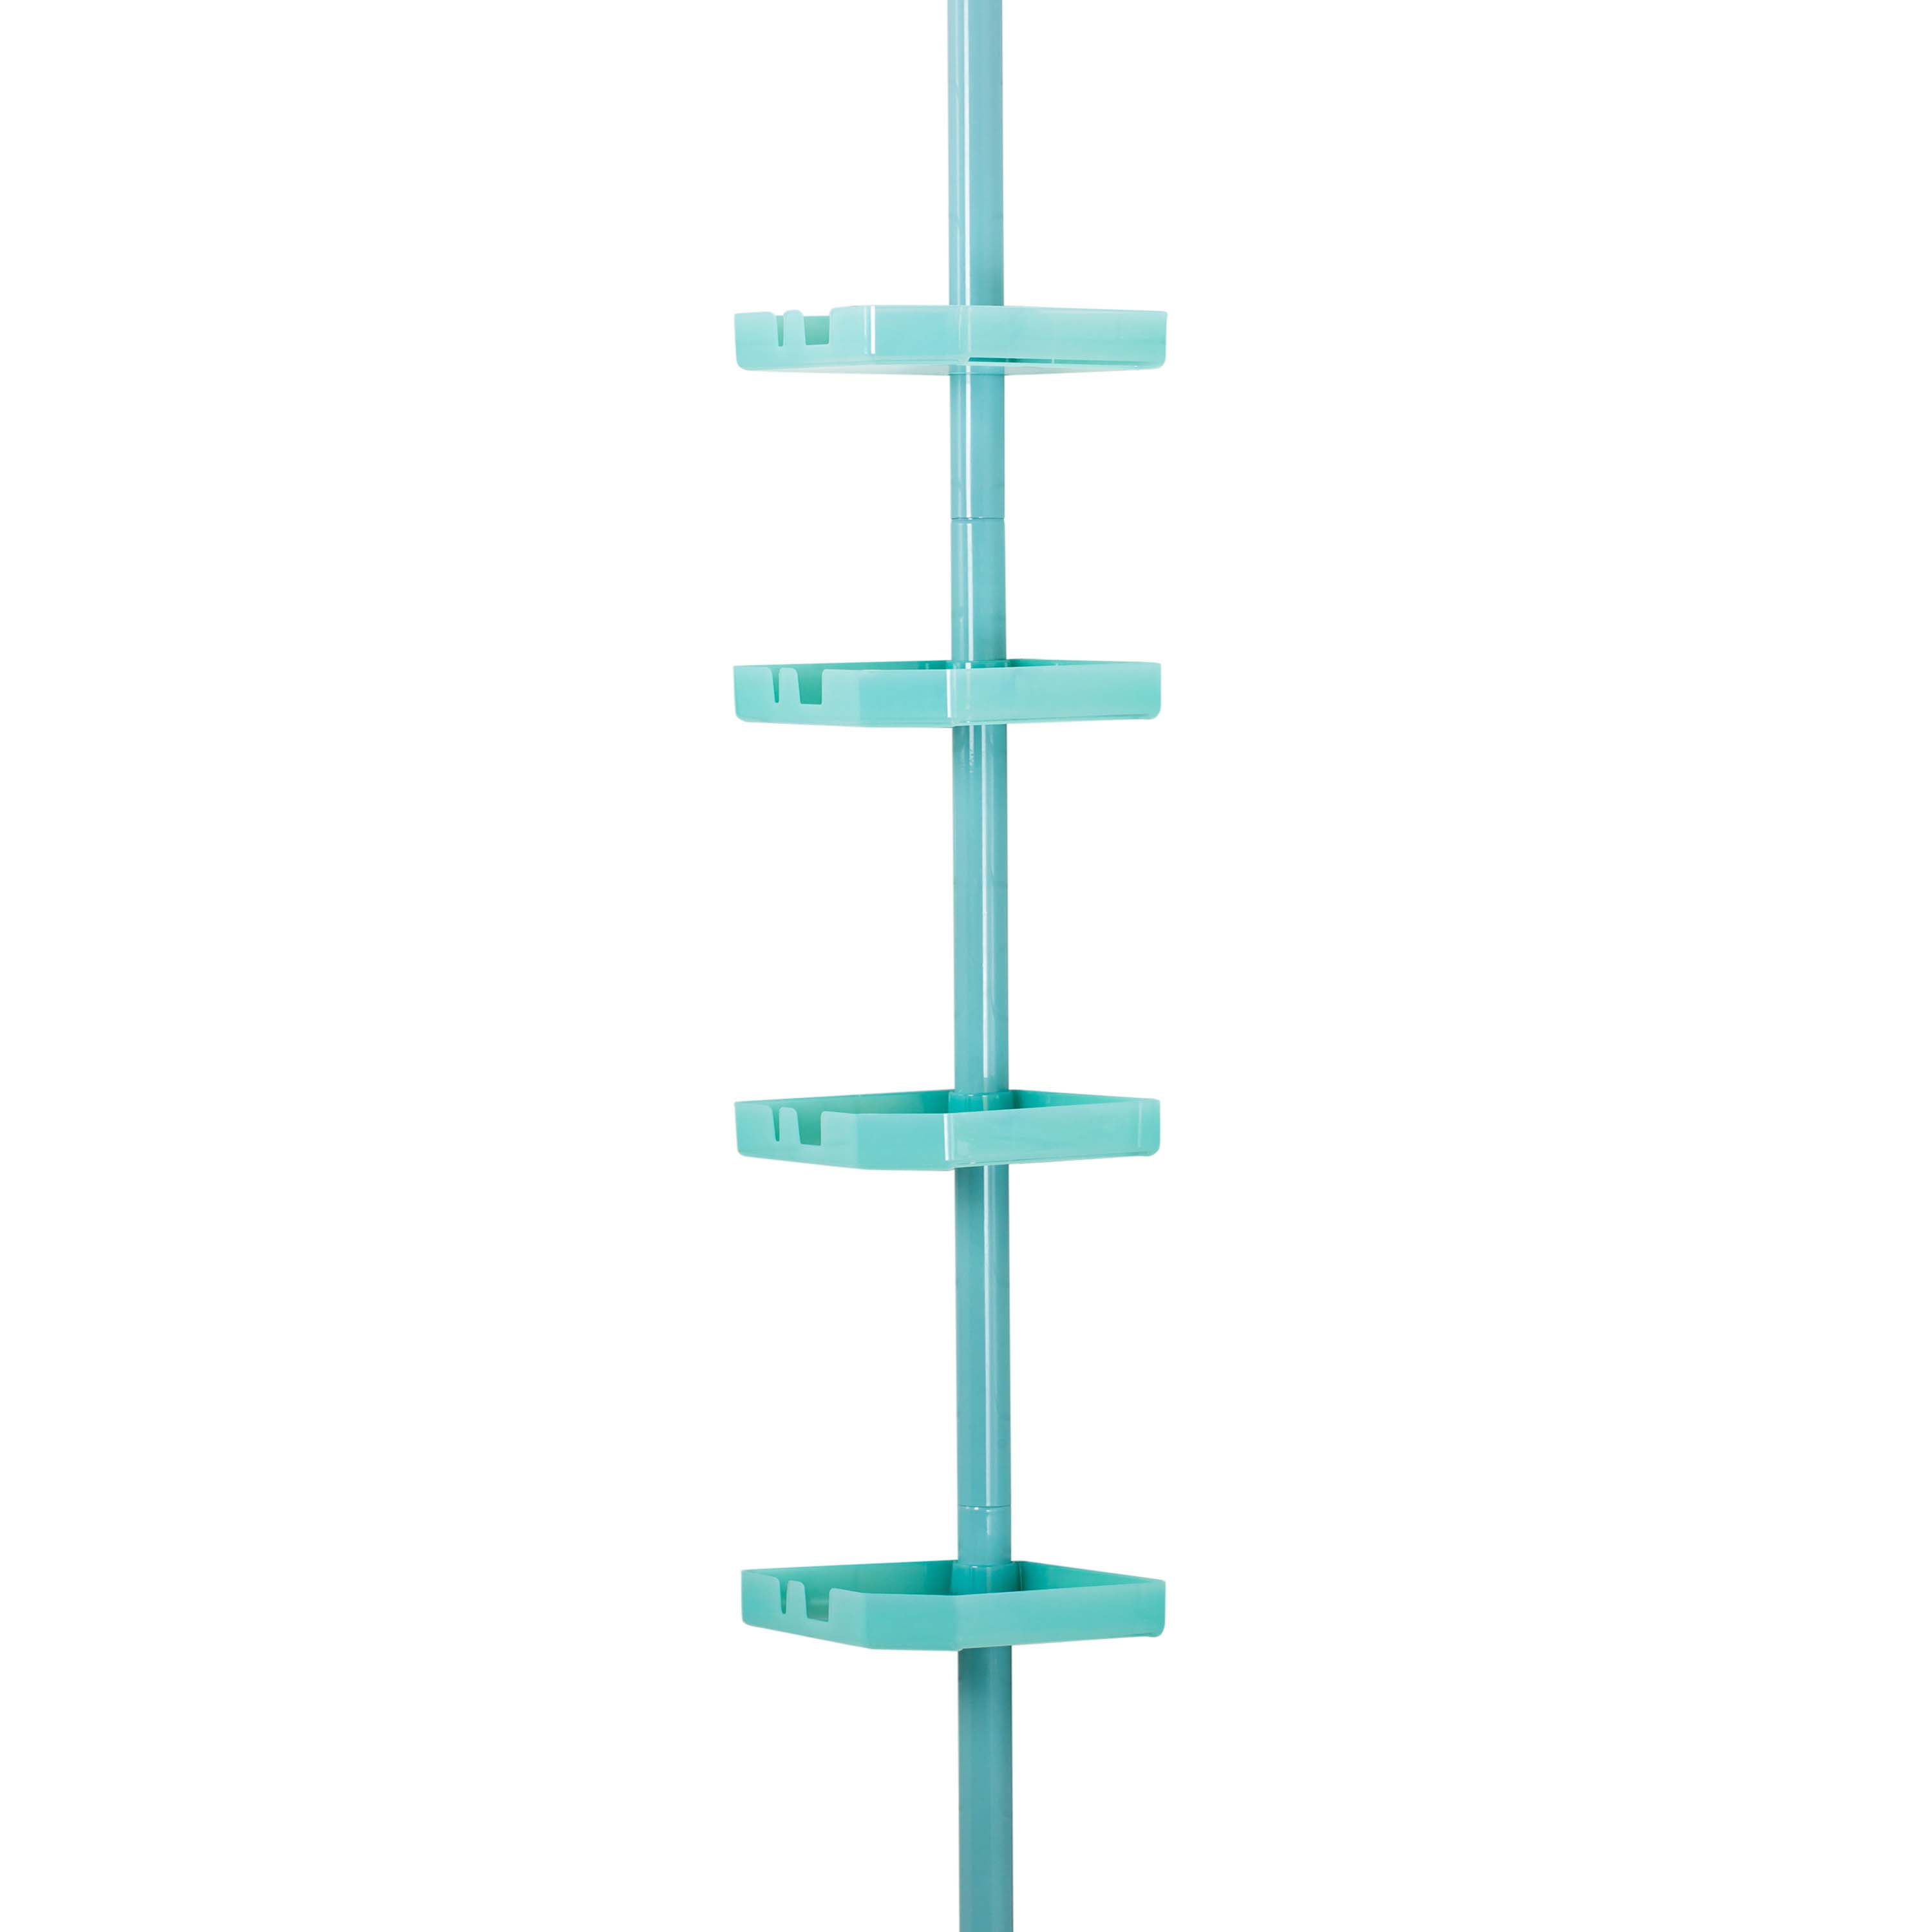 Bath Bliss 2-Way Convertible Shower Caddy in Sea Glass 27190